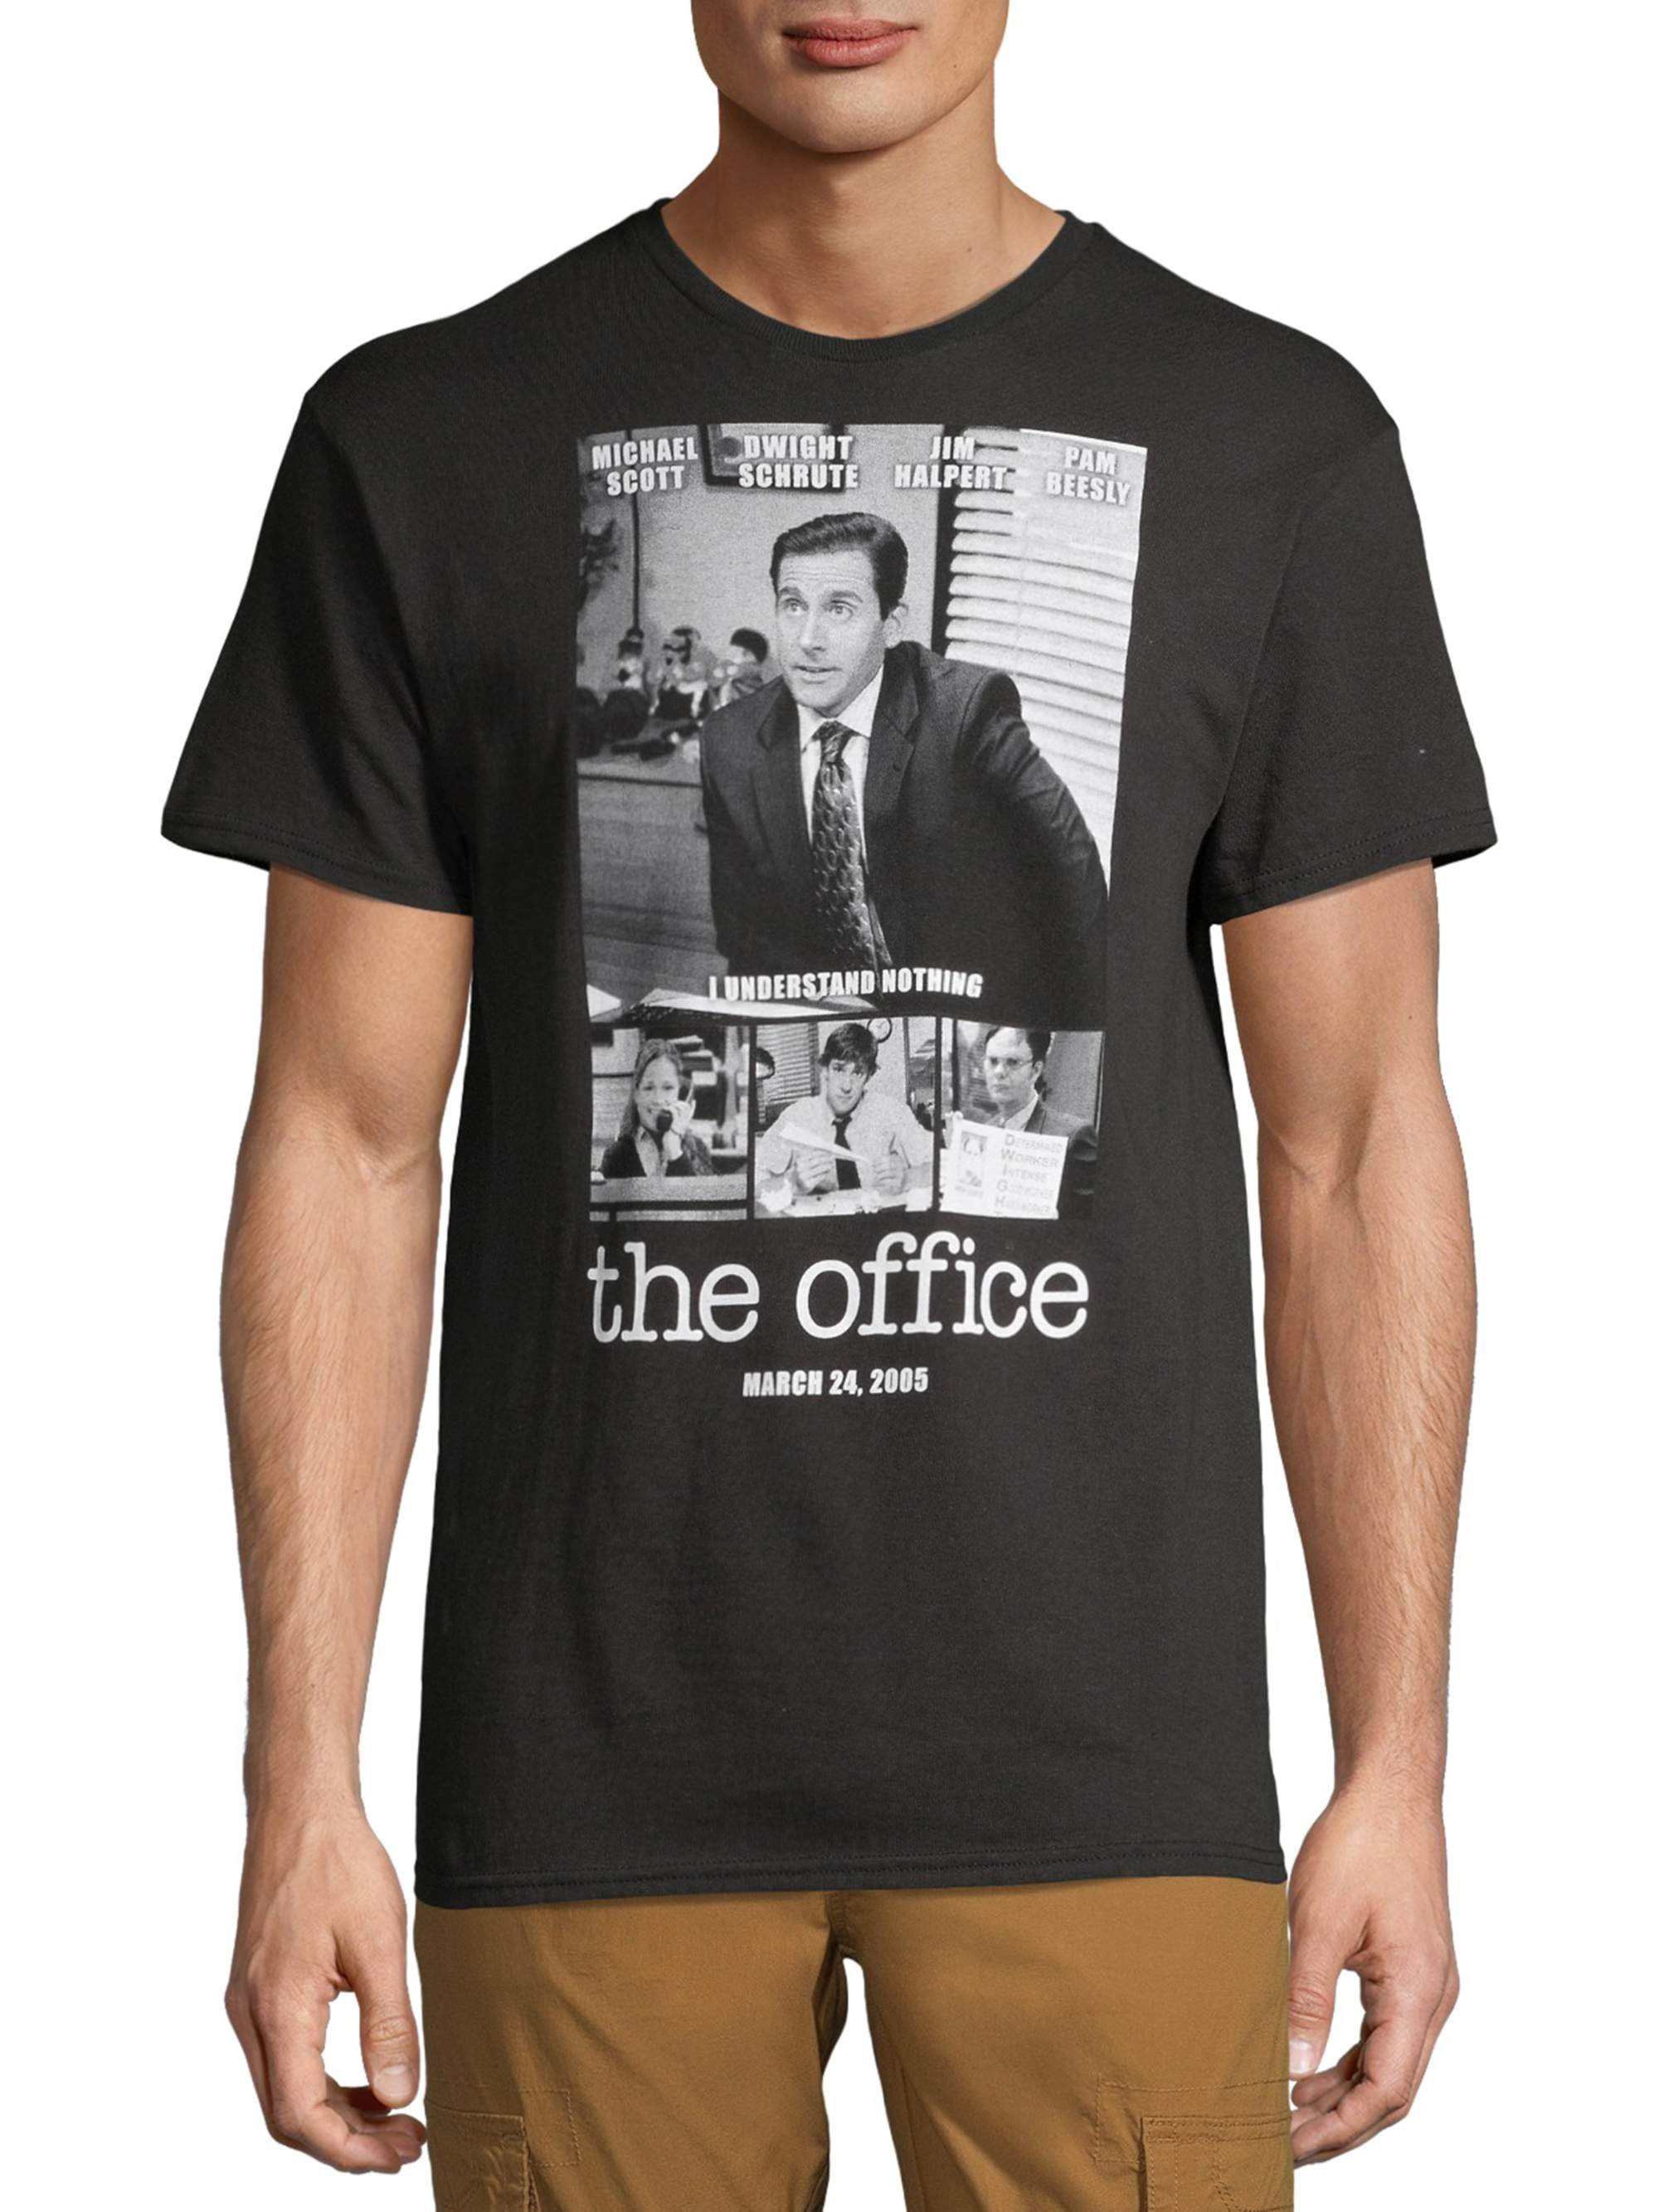 Dunder Mifflin The Office Poster Men's and Big Men's Graphic T-shirt 